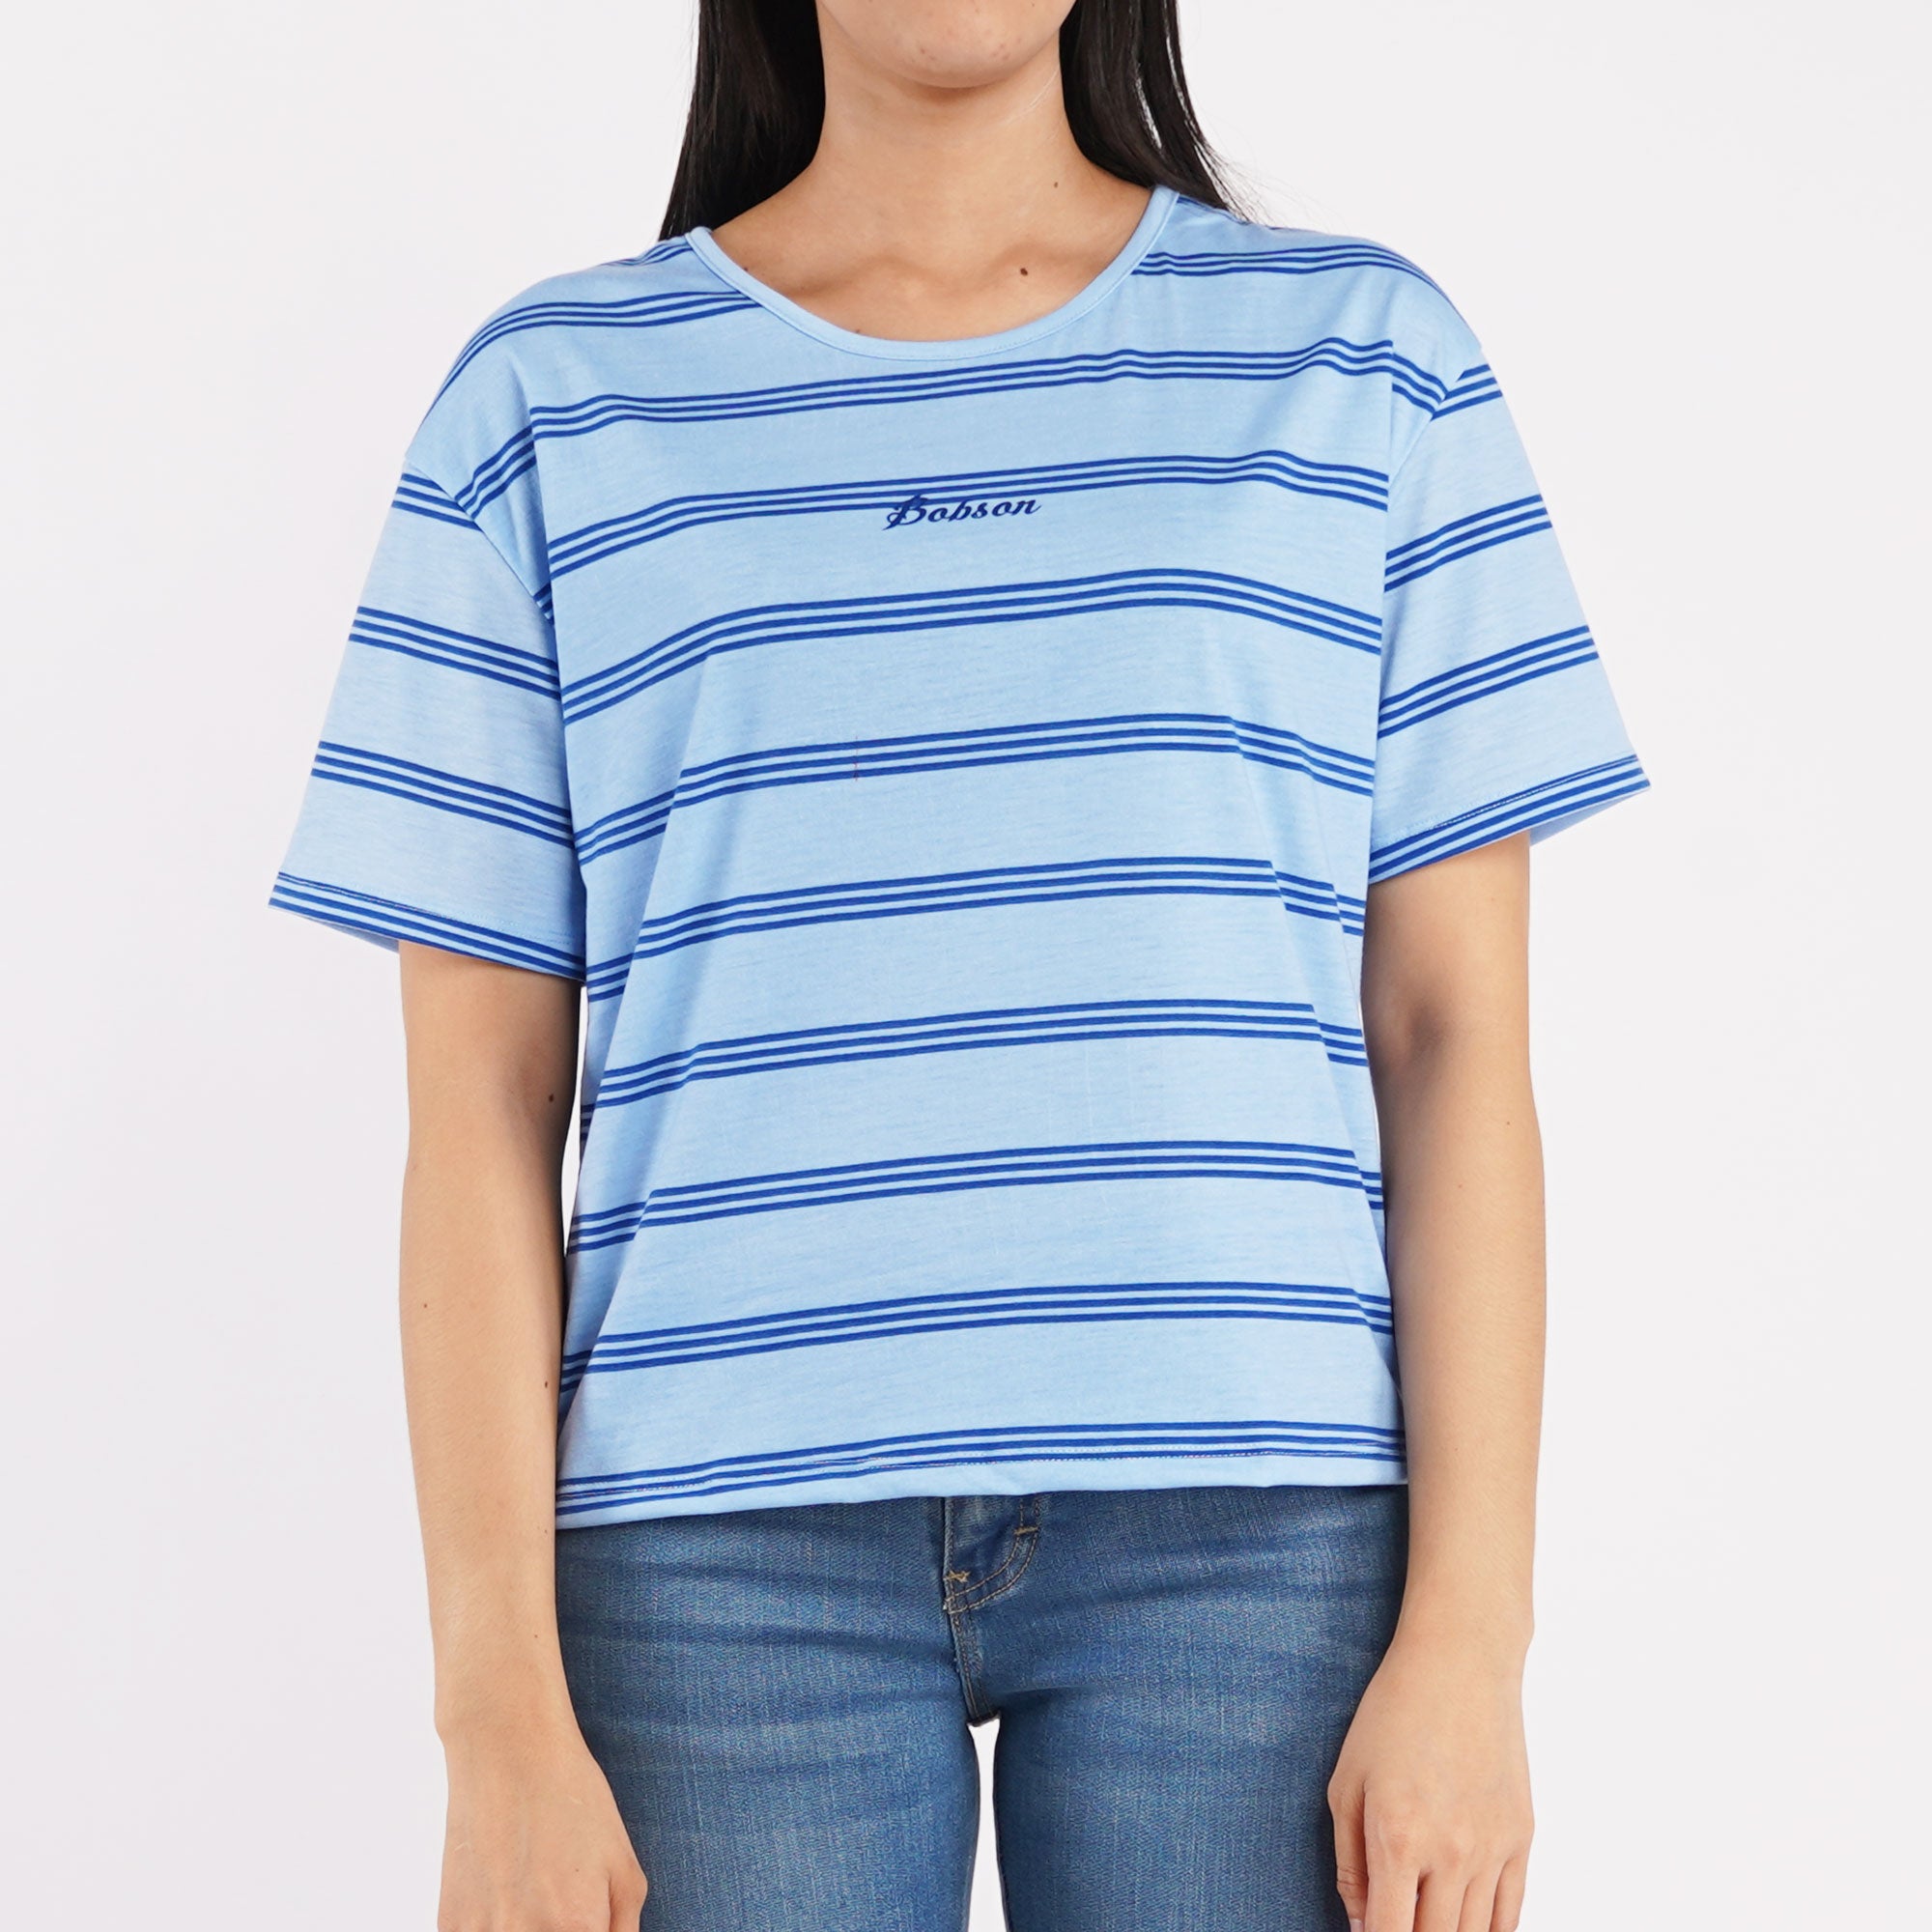 Bobson Japanese Ladies Basic Tees Striped Round Neck T-shirt for Women Trendy Fashion High Quality Apparel Comfortable Casual Top for Women Relaxed Fit 124068 (Light Blue)